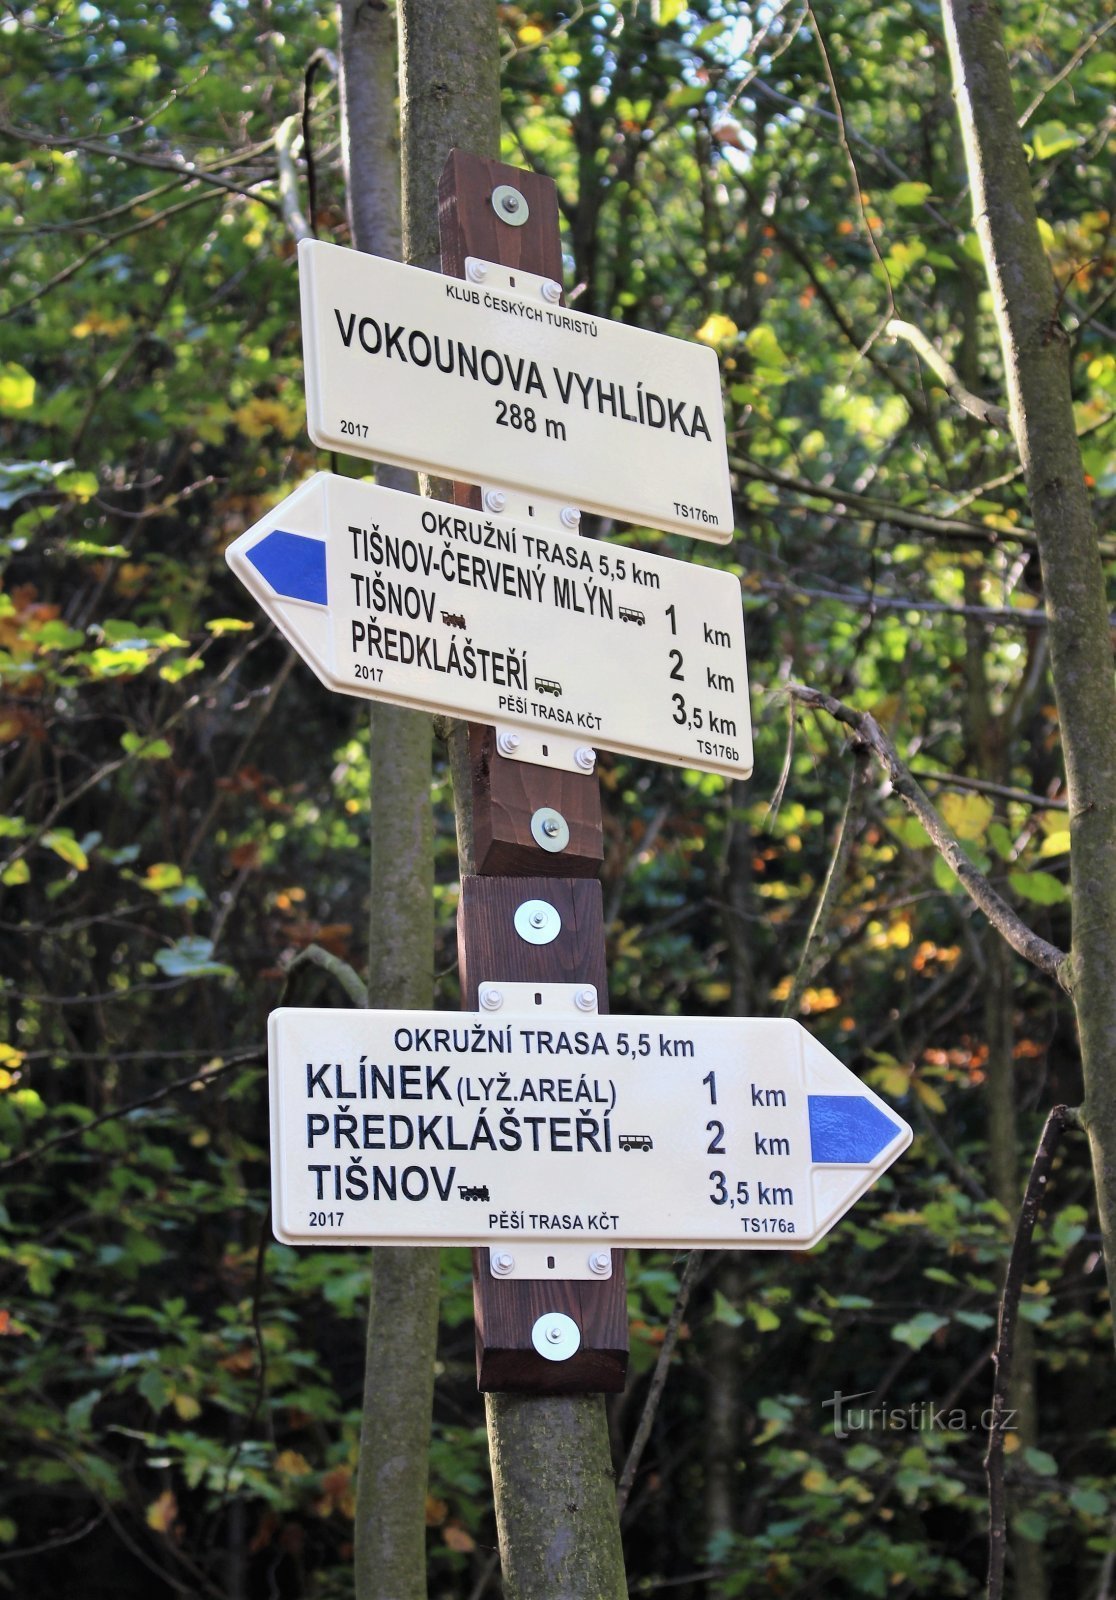 Tourist signs at the viewpoint